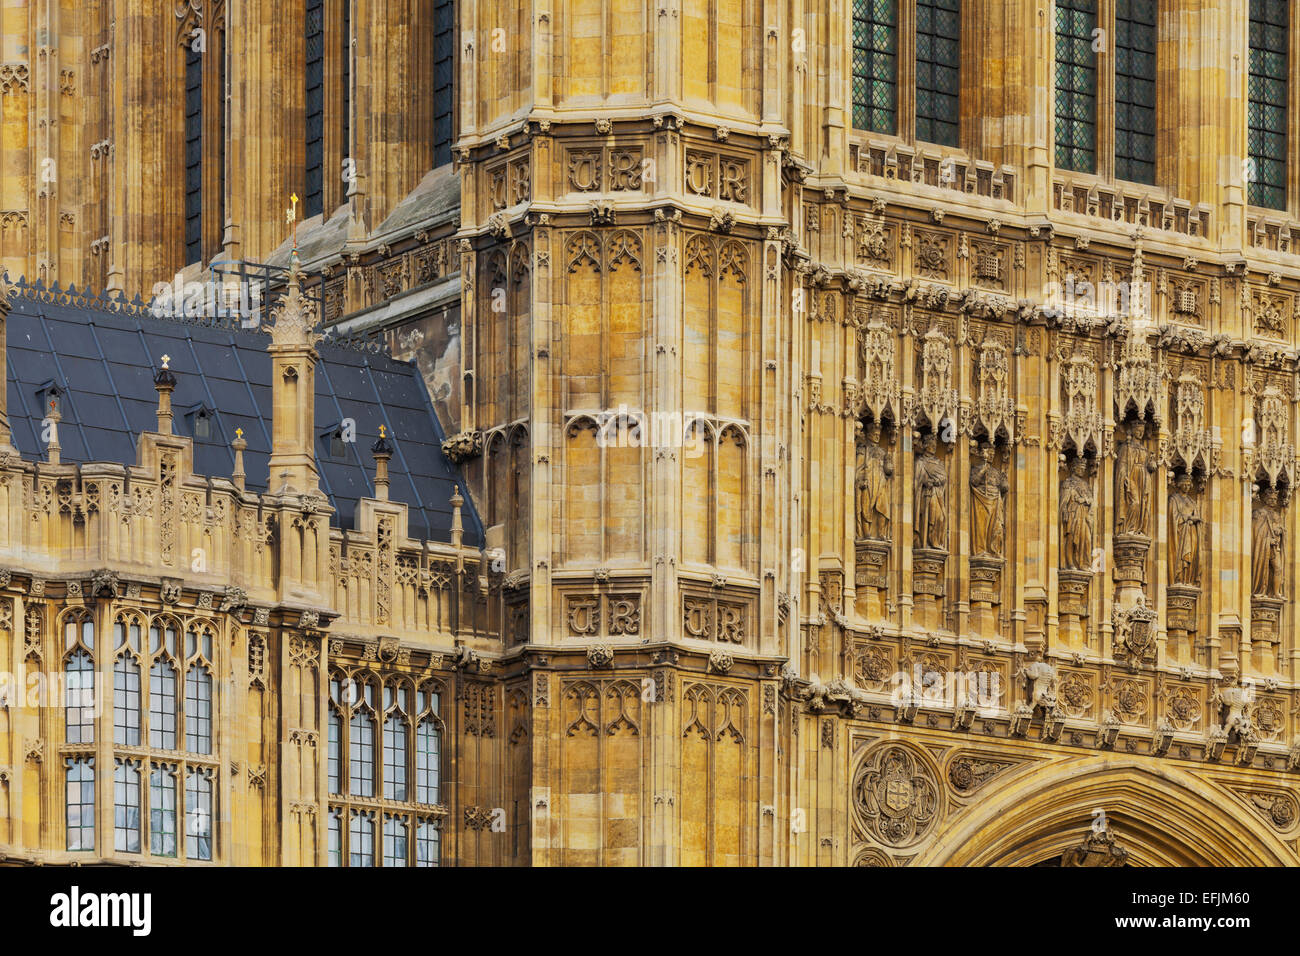 Ornament of the fassade of the Westminster Palace, London, England Stock Photo